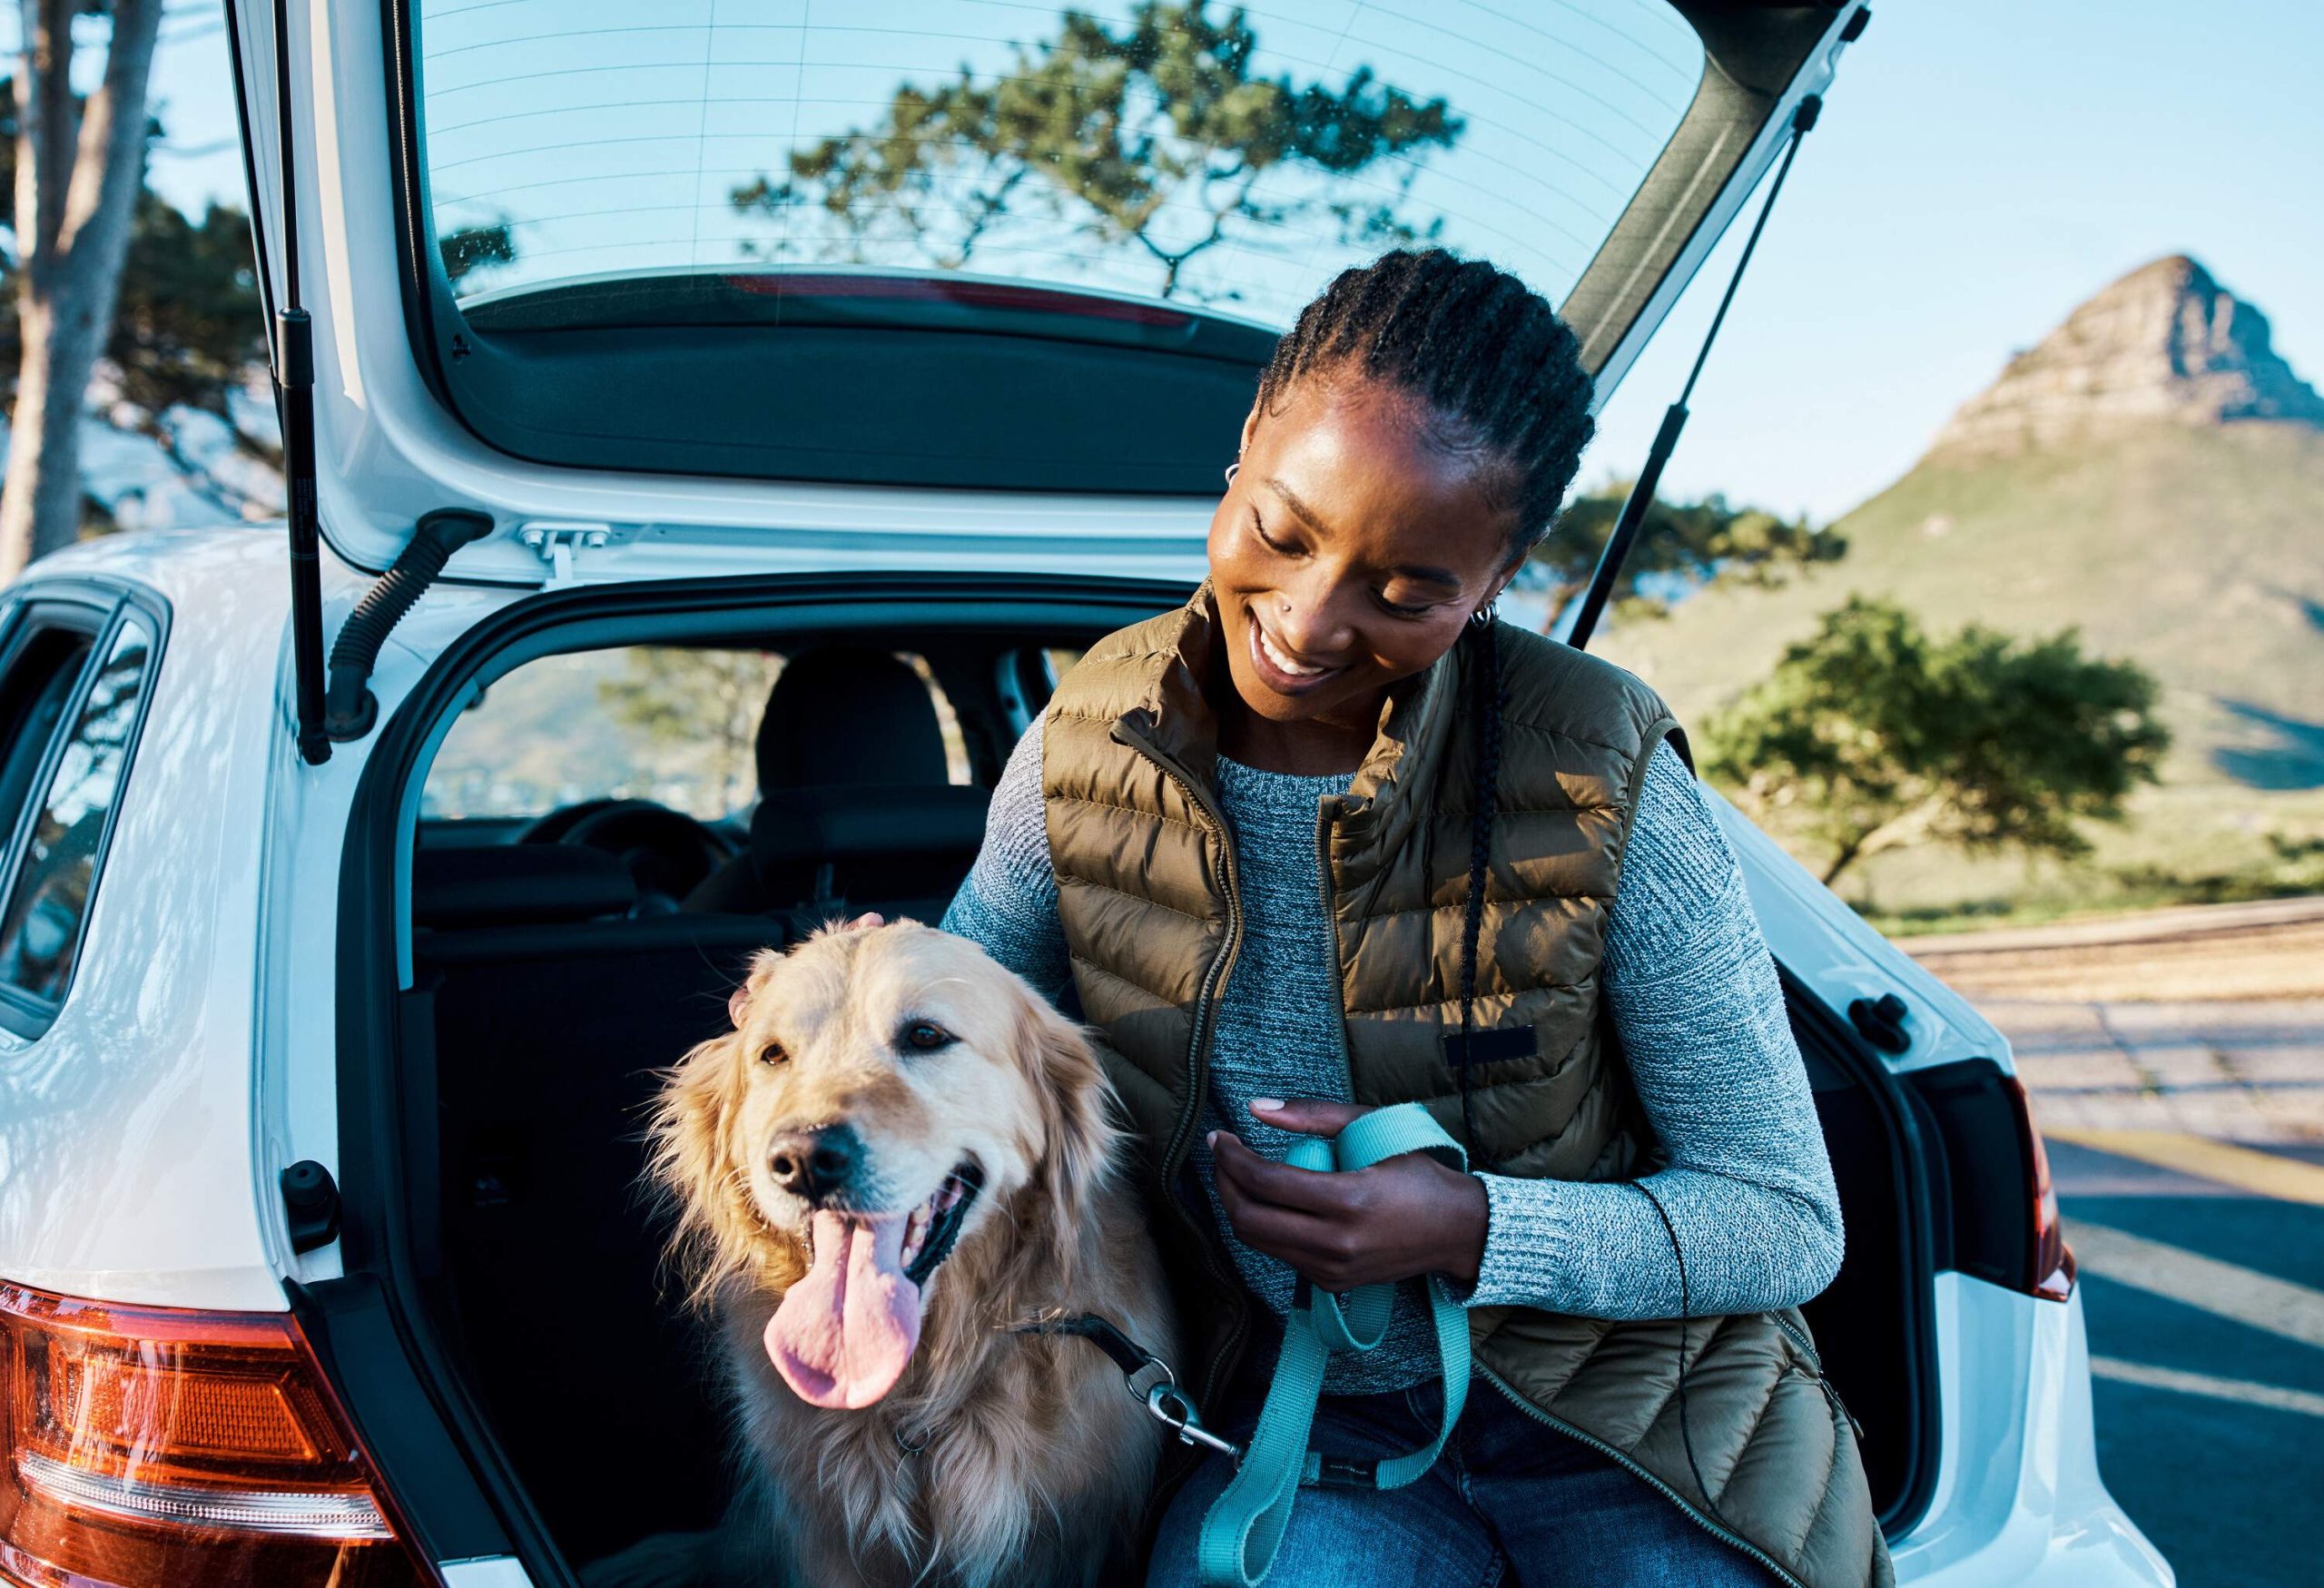 A smiling woman sits on the trunk of a car and pets her dog.